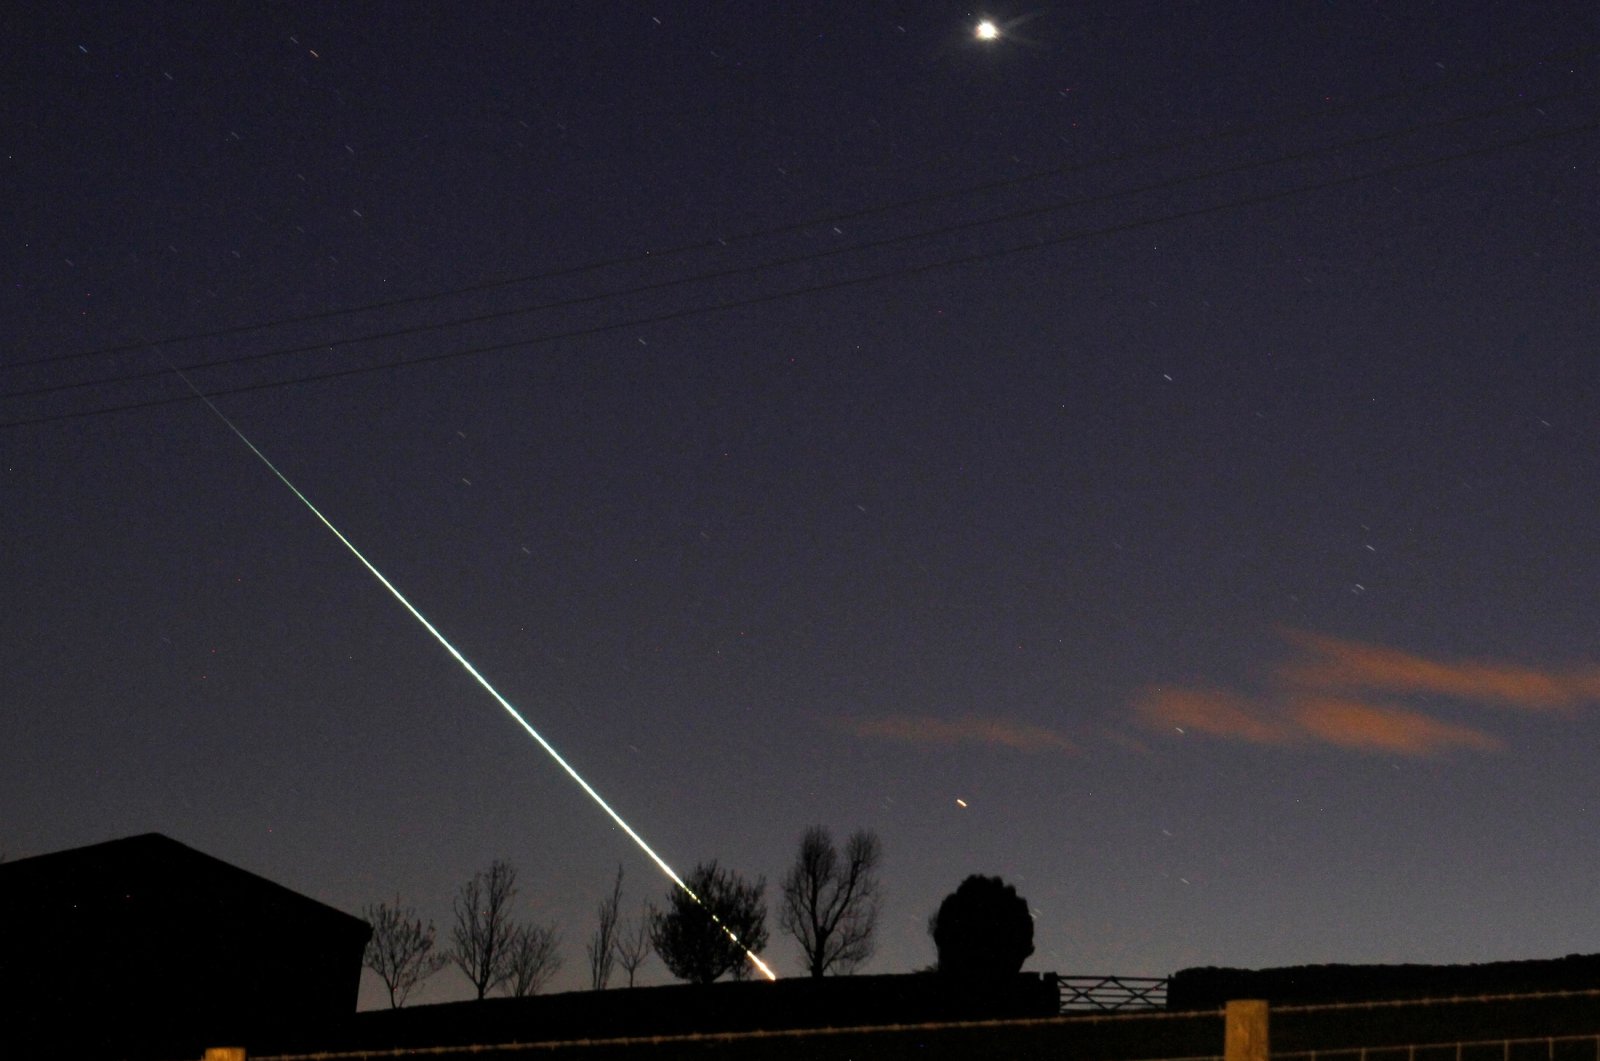 A meteorite creates a streak of light across the night sky over the North Yorkshire moors at Leaholm, near Whitby, northern England, U.K., April 26, 2015. (Reuters Photo)